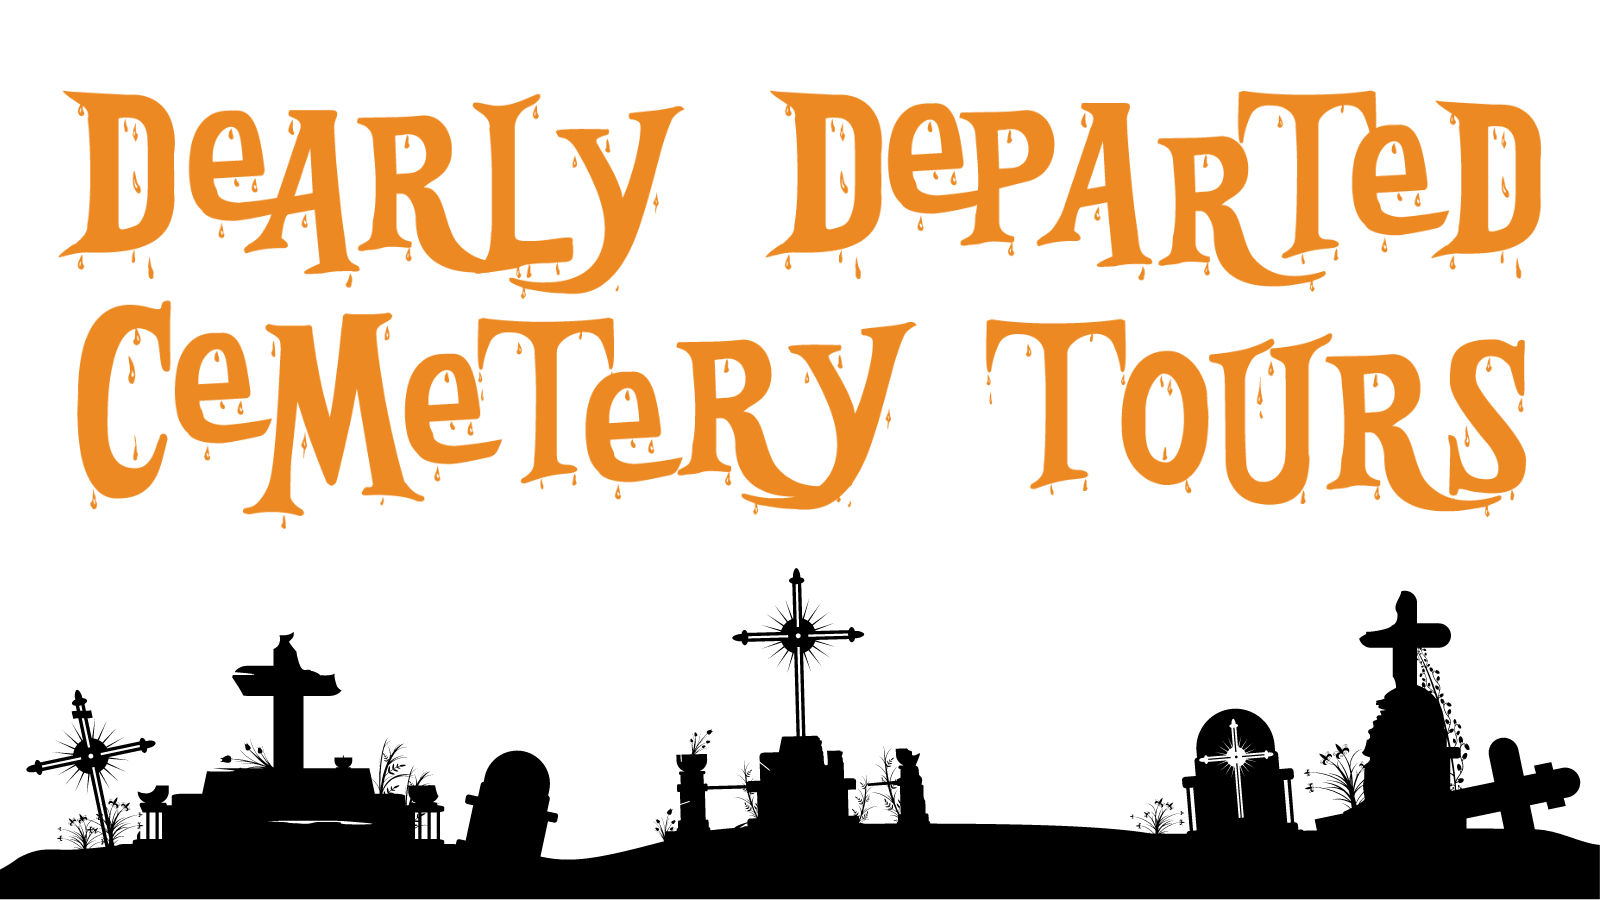 Dearly Departed Cemetery Tours social media graphic